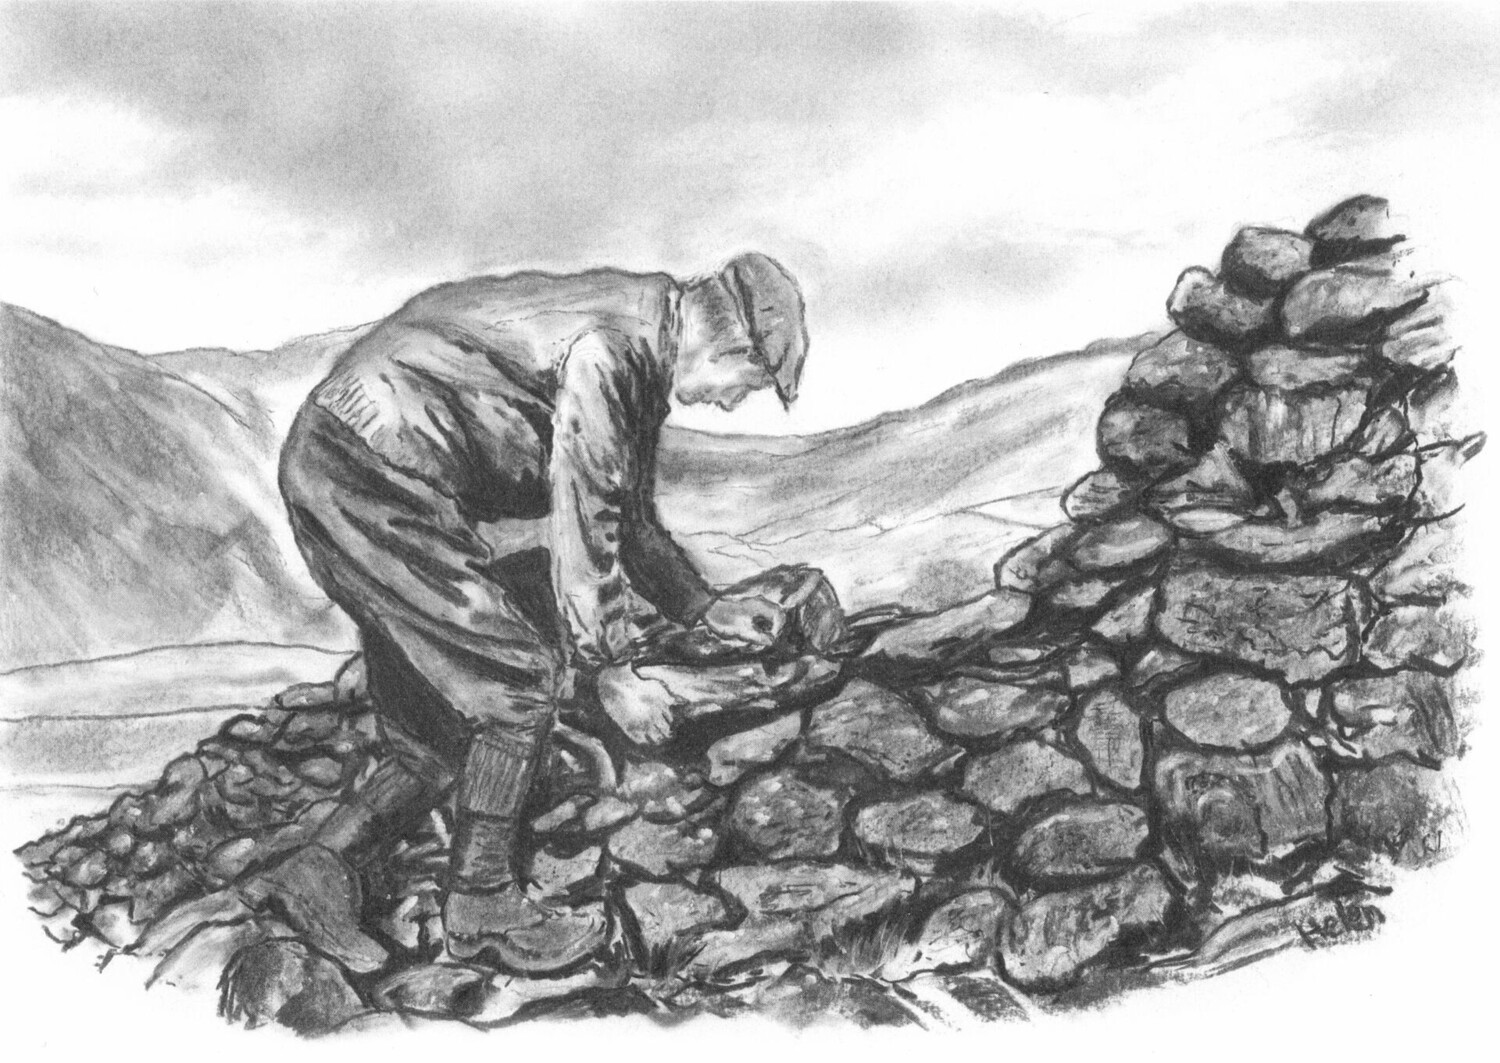 The dry stone waller